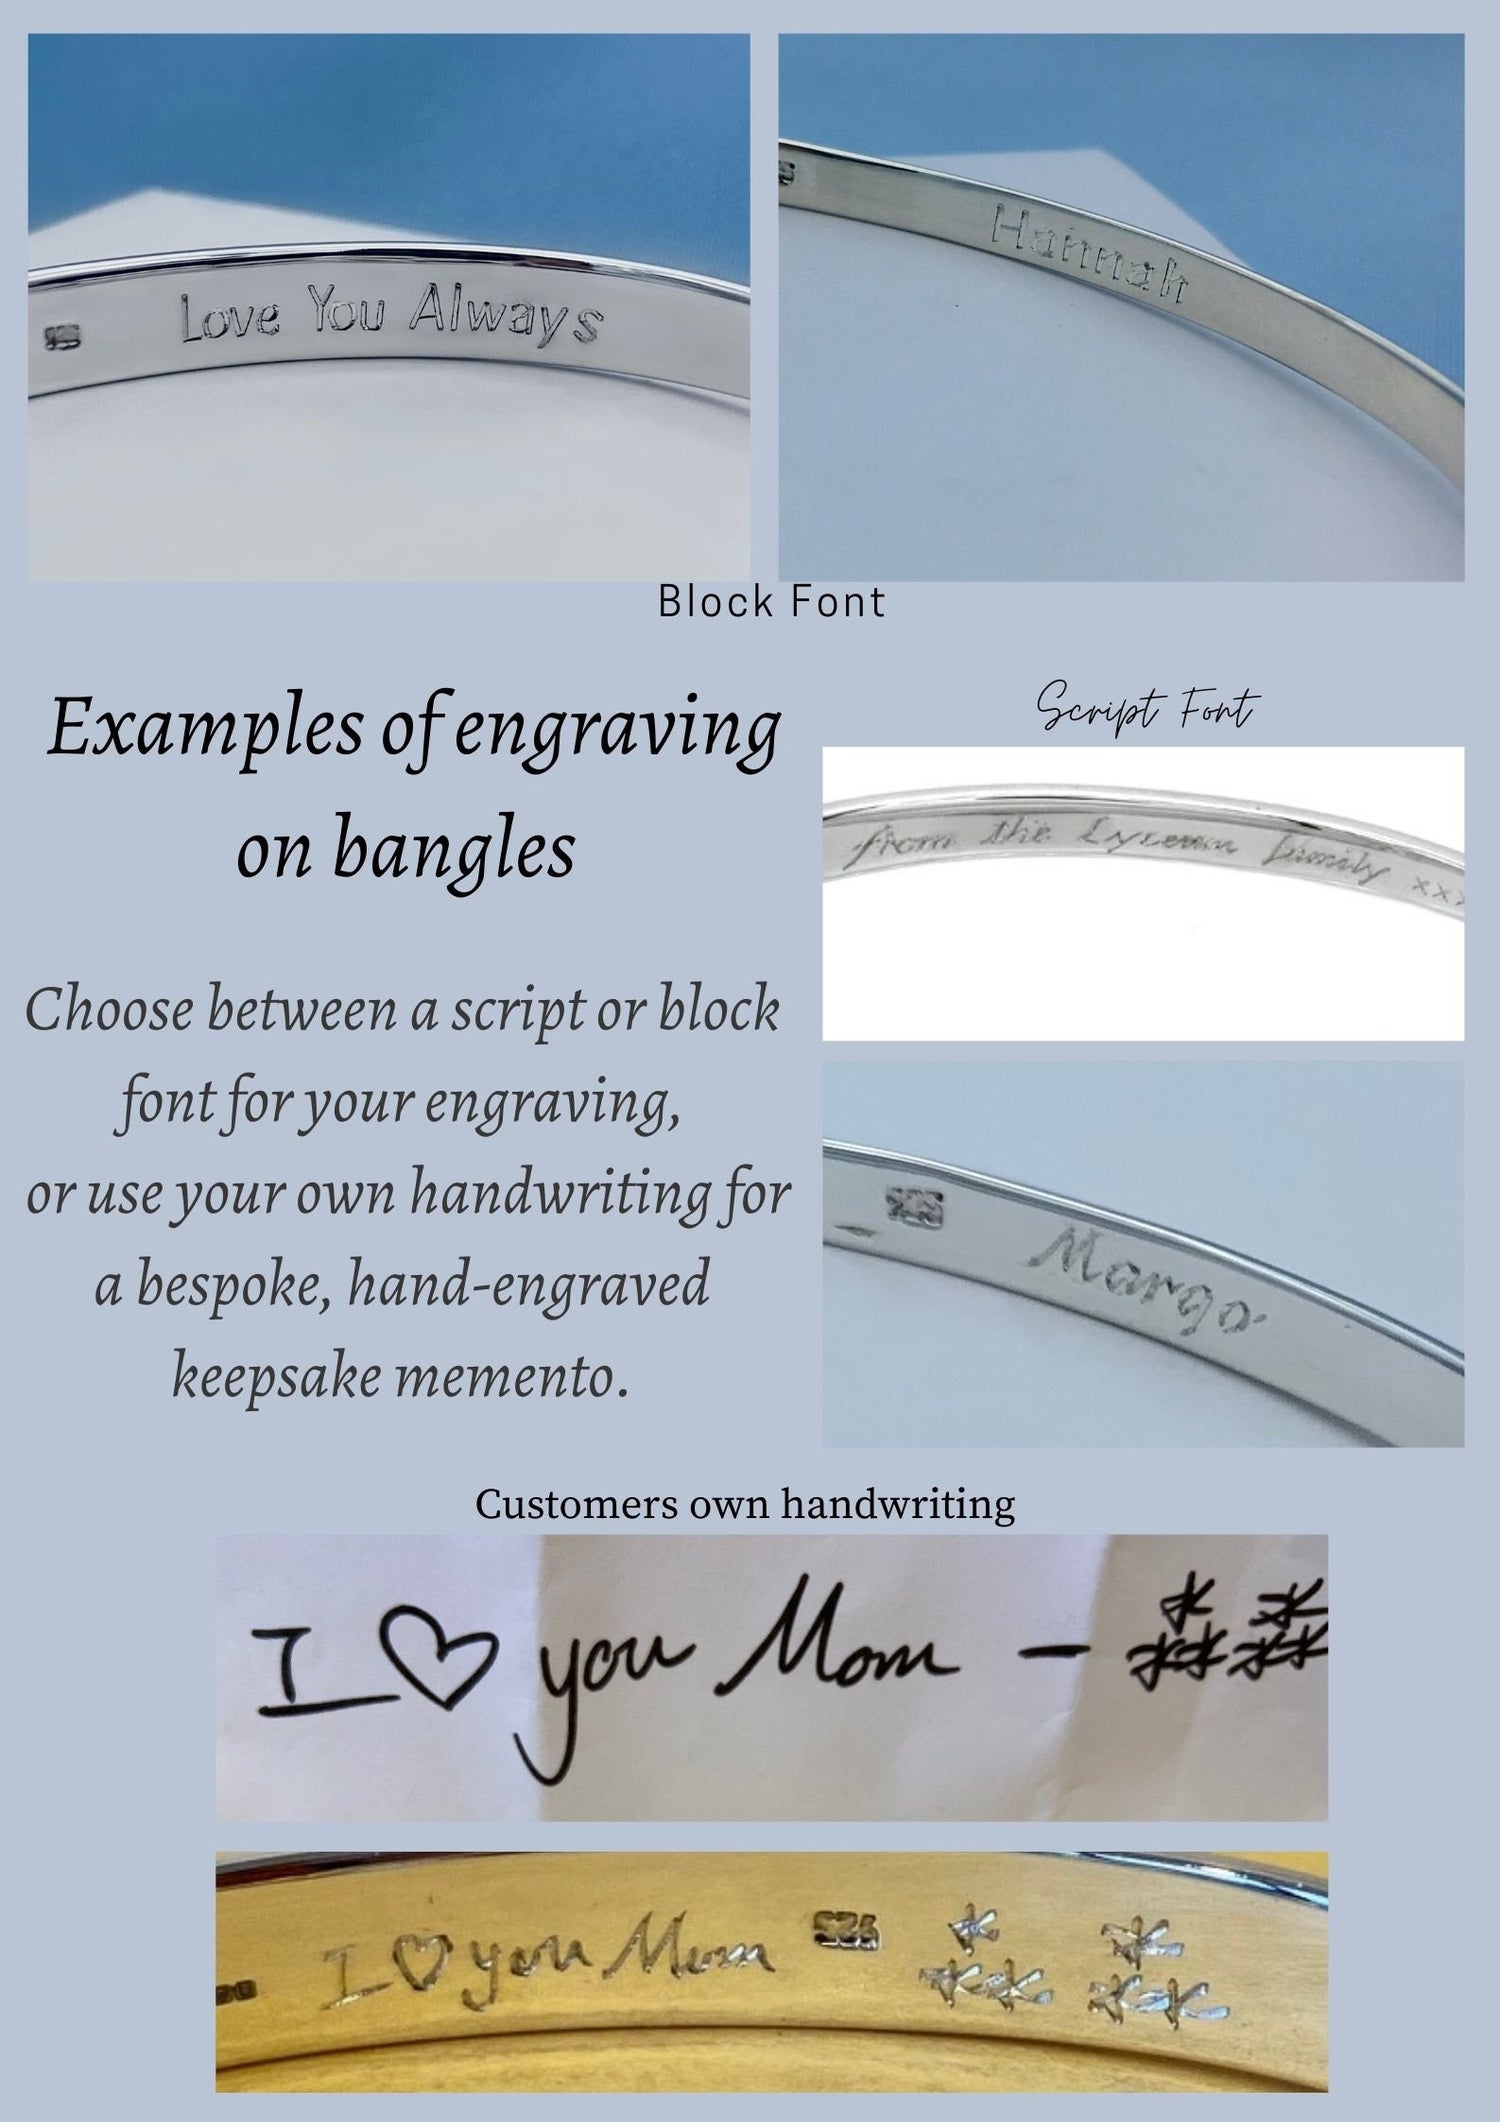 Add-on personalization service, hand engraving, actual handwriting, handwriting message, personalized jewelry, hand personalization service